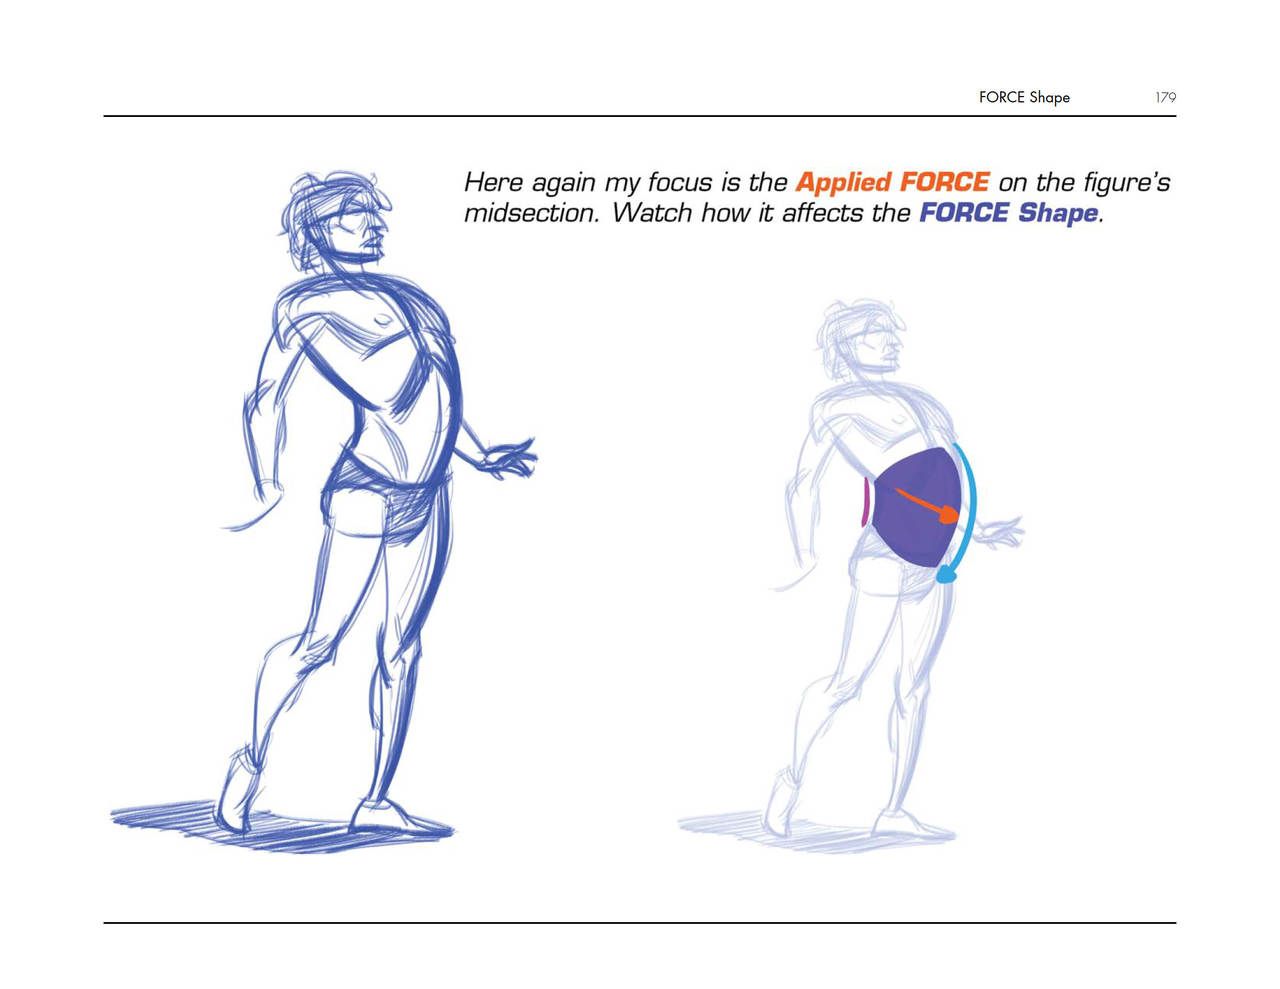 The Force companion_ quick tips and tricks-CRC Press (2019) - Michael D. Mattesi [Digital] 192